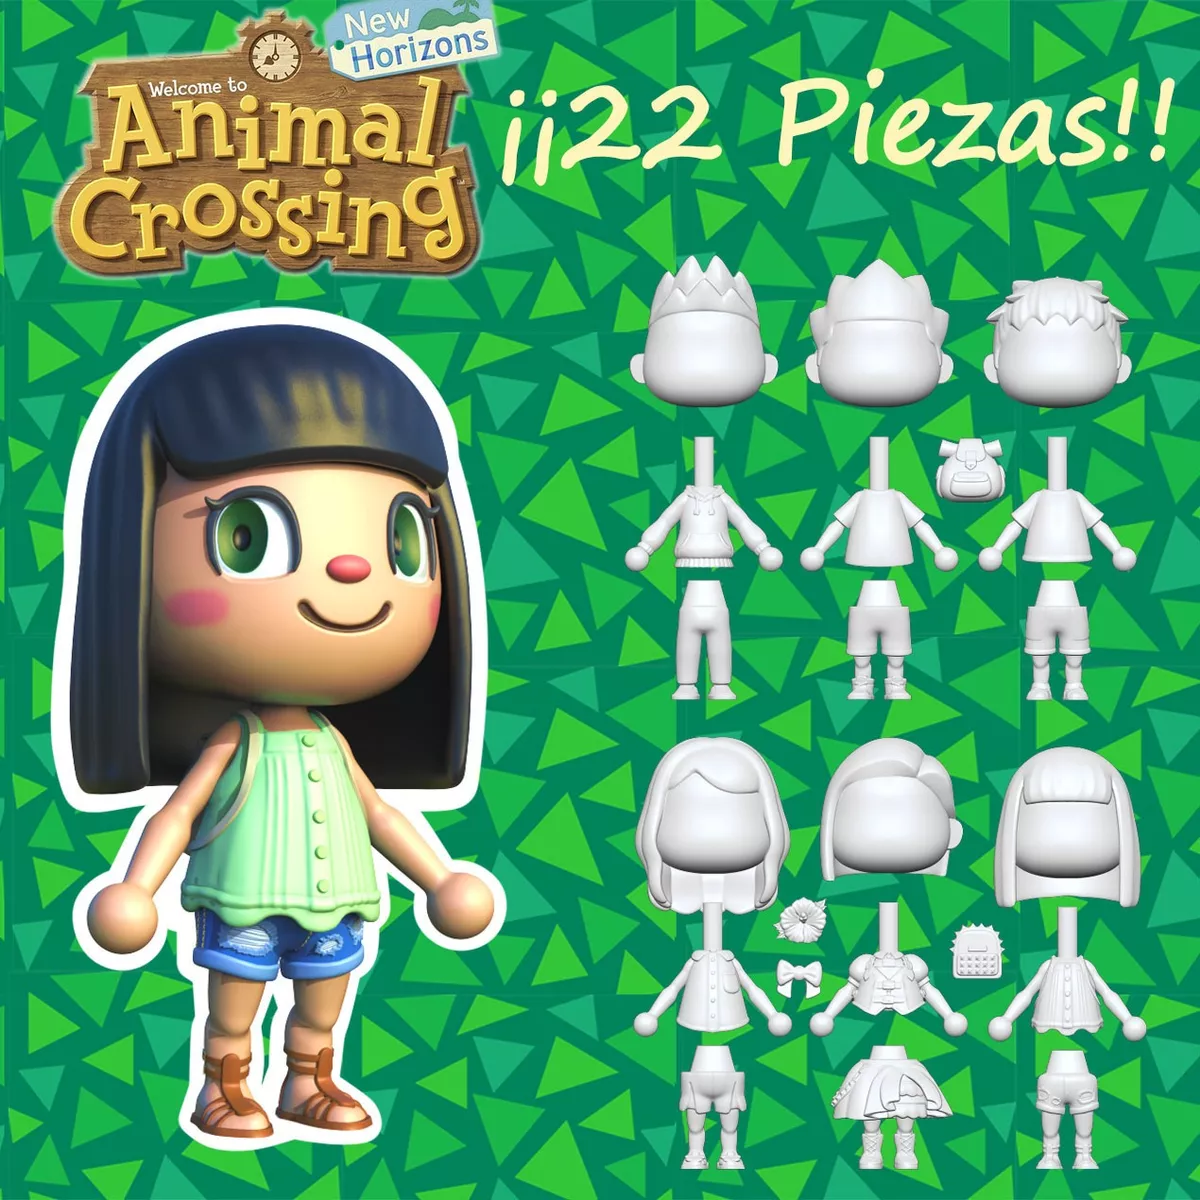 Animal Crossing A Villager New Horizons- Escultura